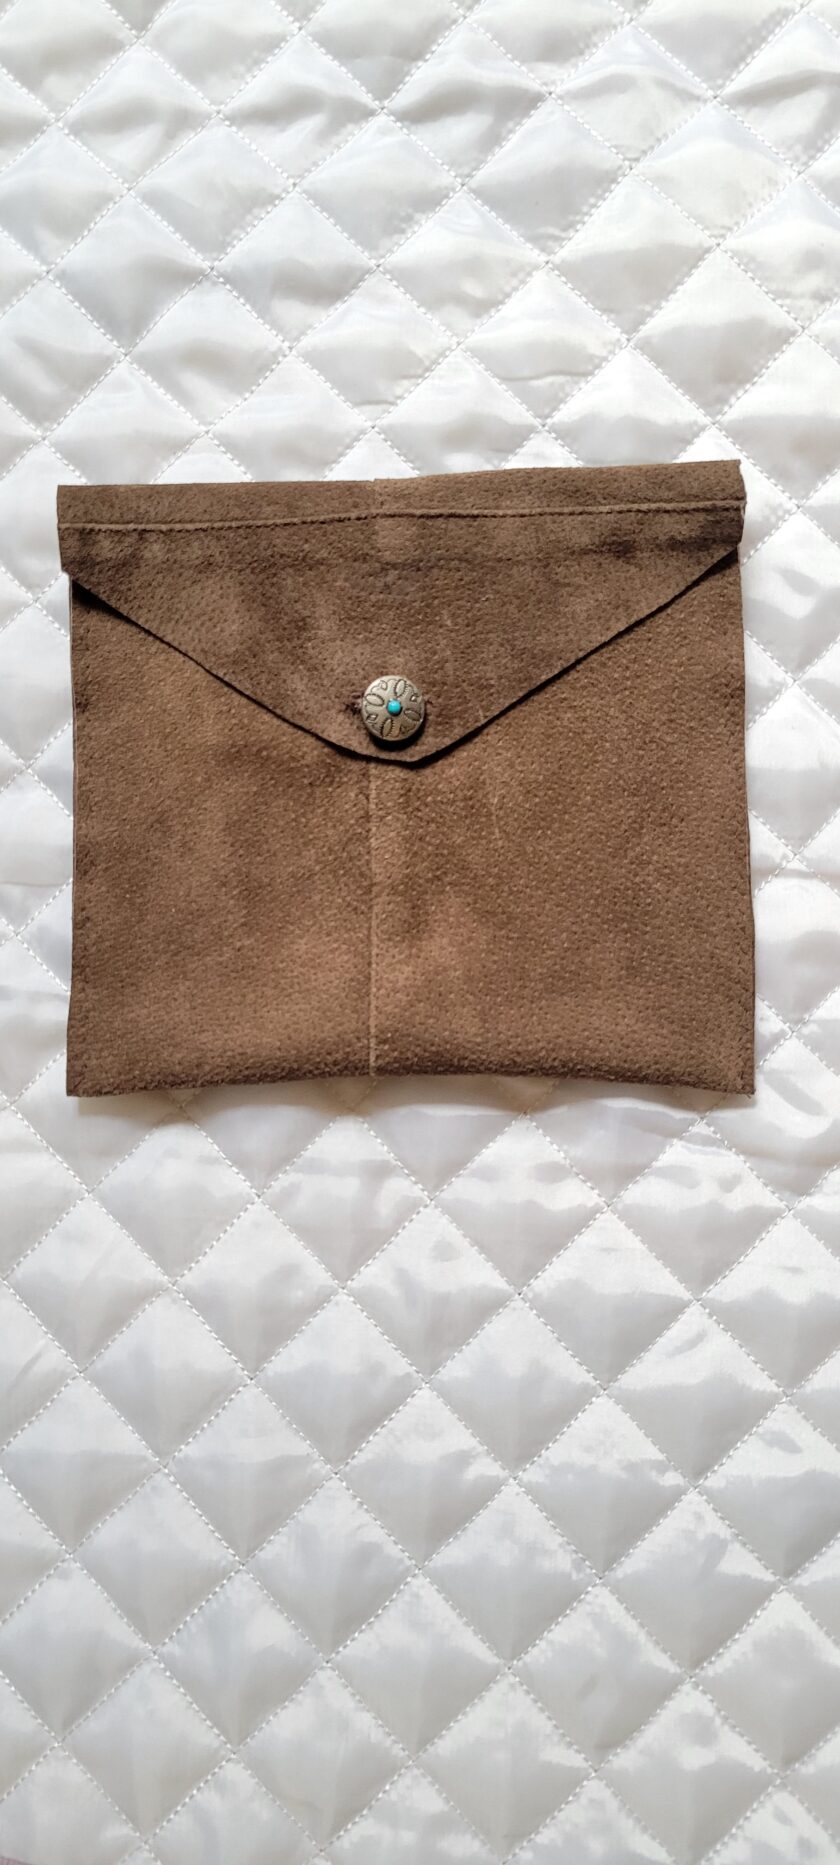 A brown leather bag with a blue stone button.